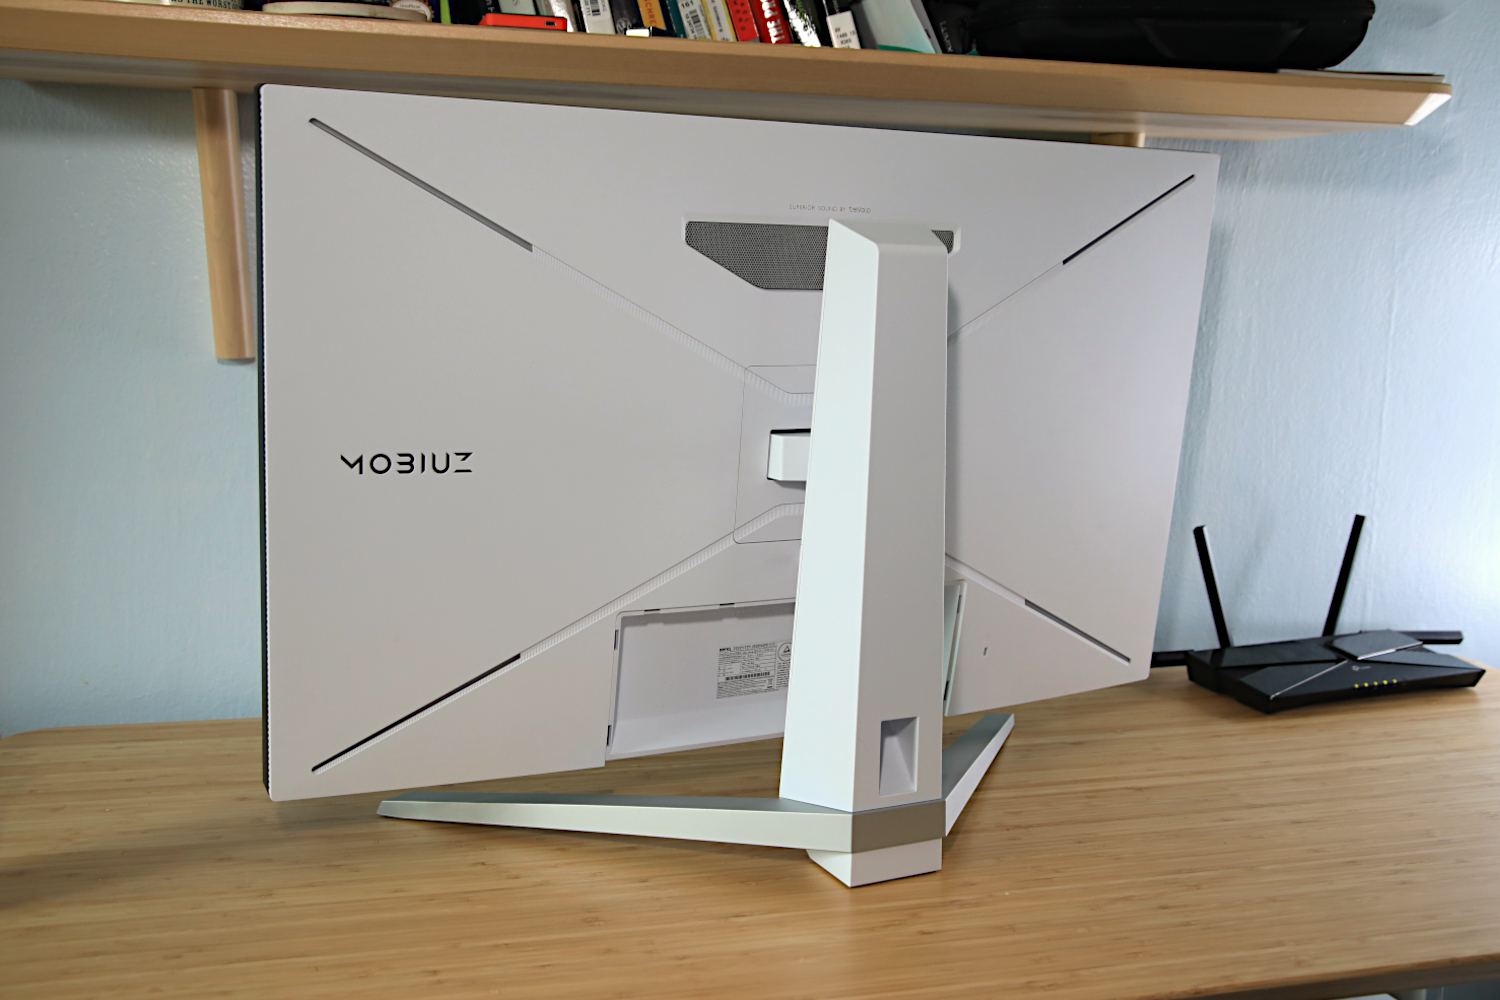 BenQ Mobiuz EX3210U review: A gaming monitor with a split